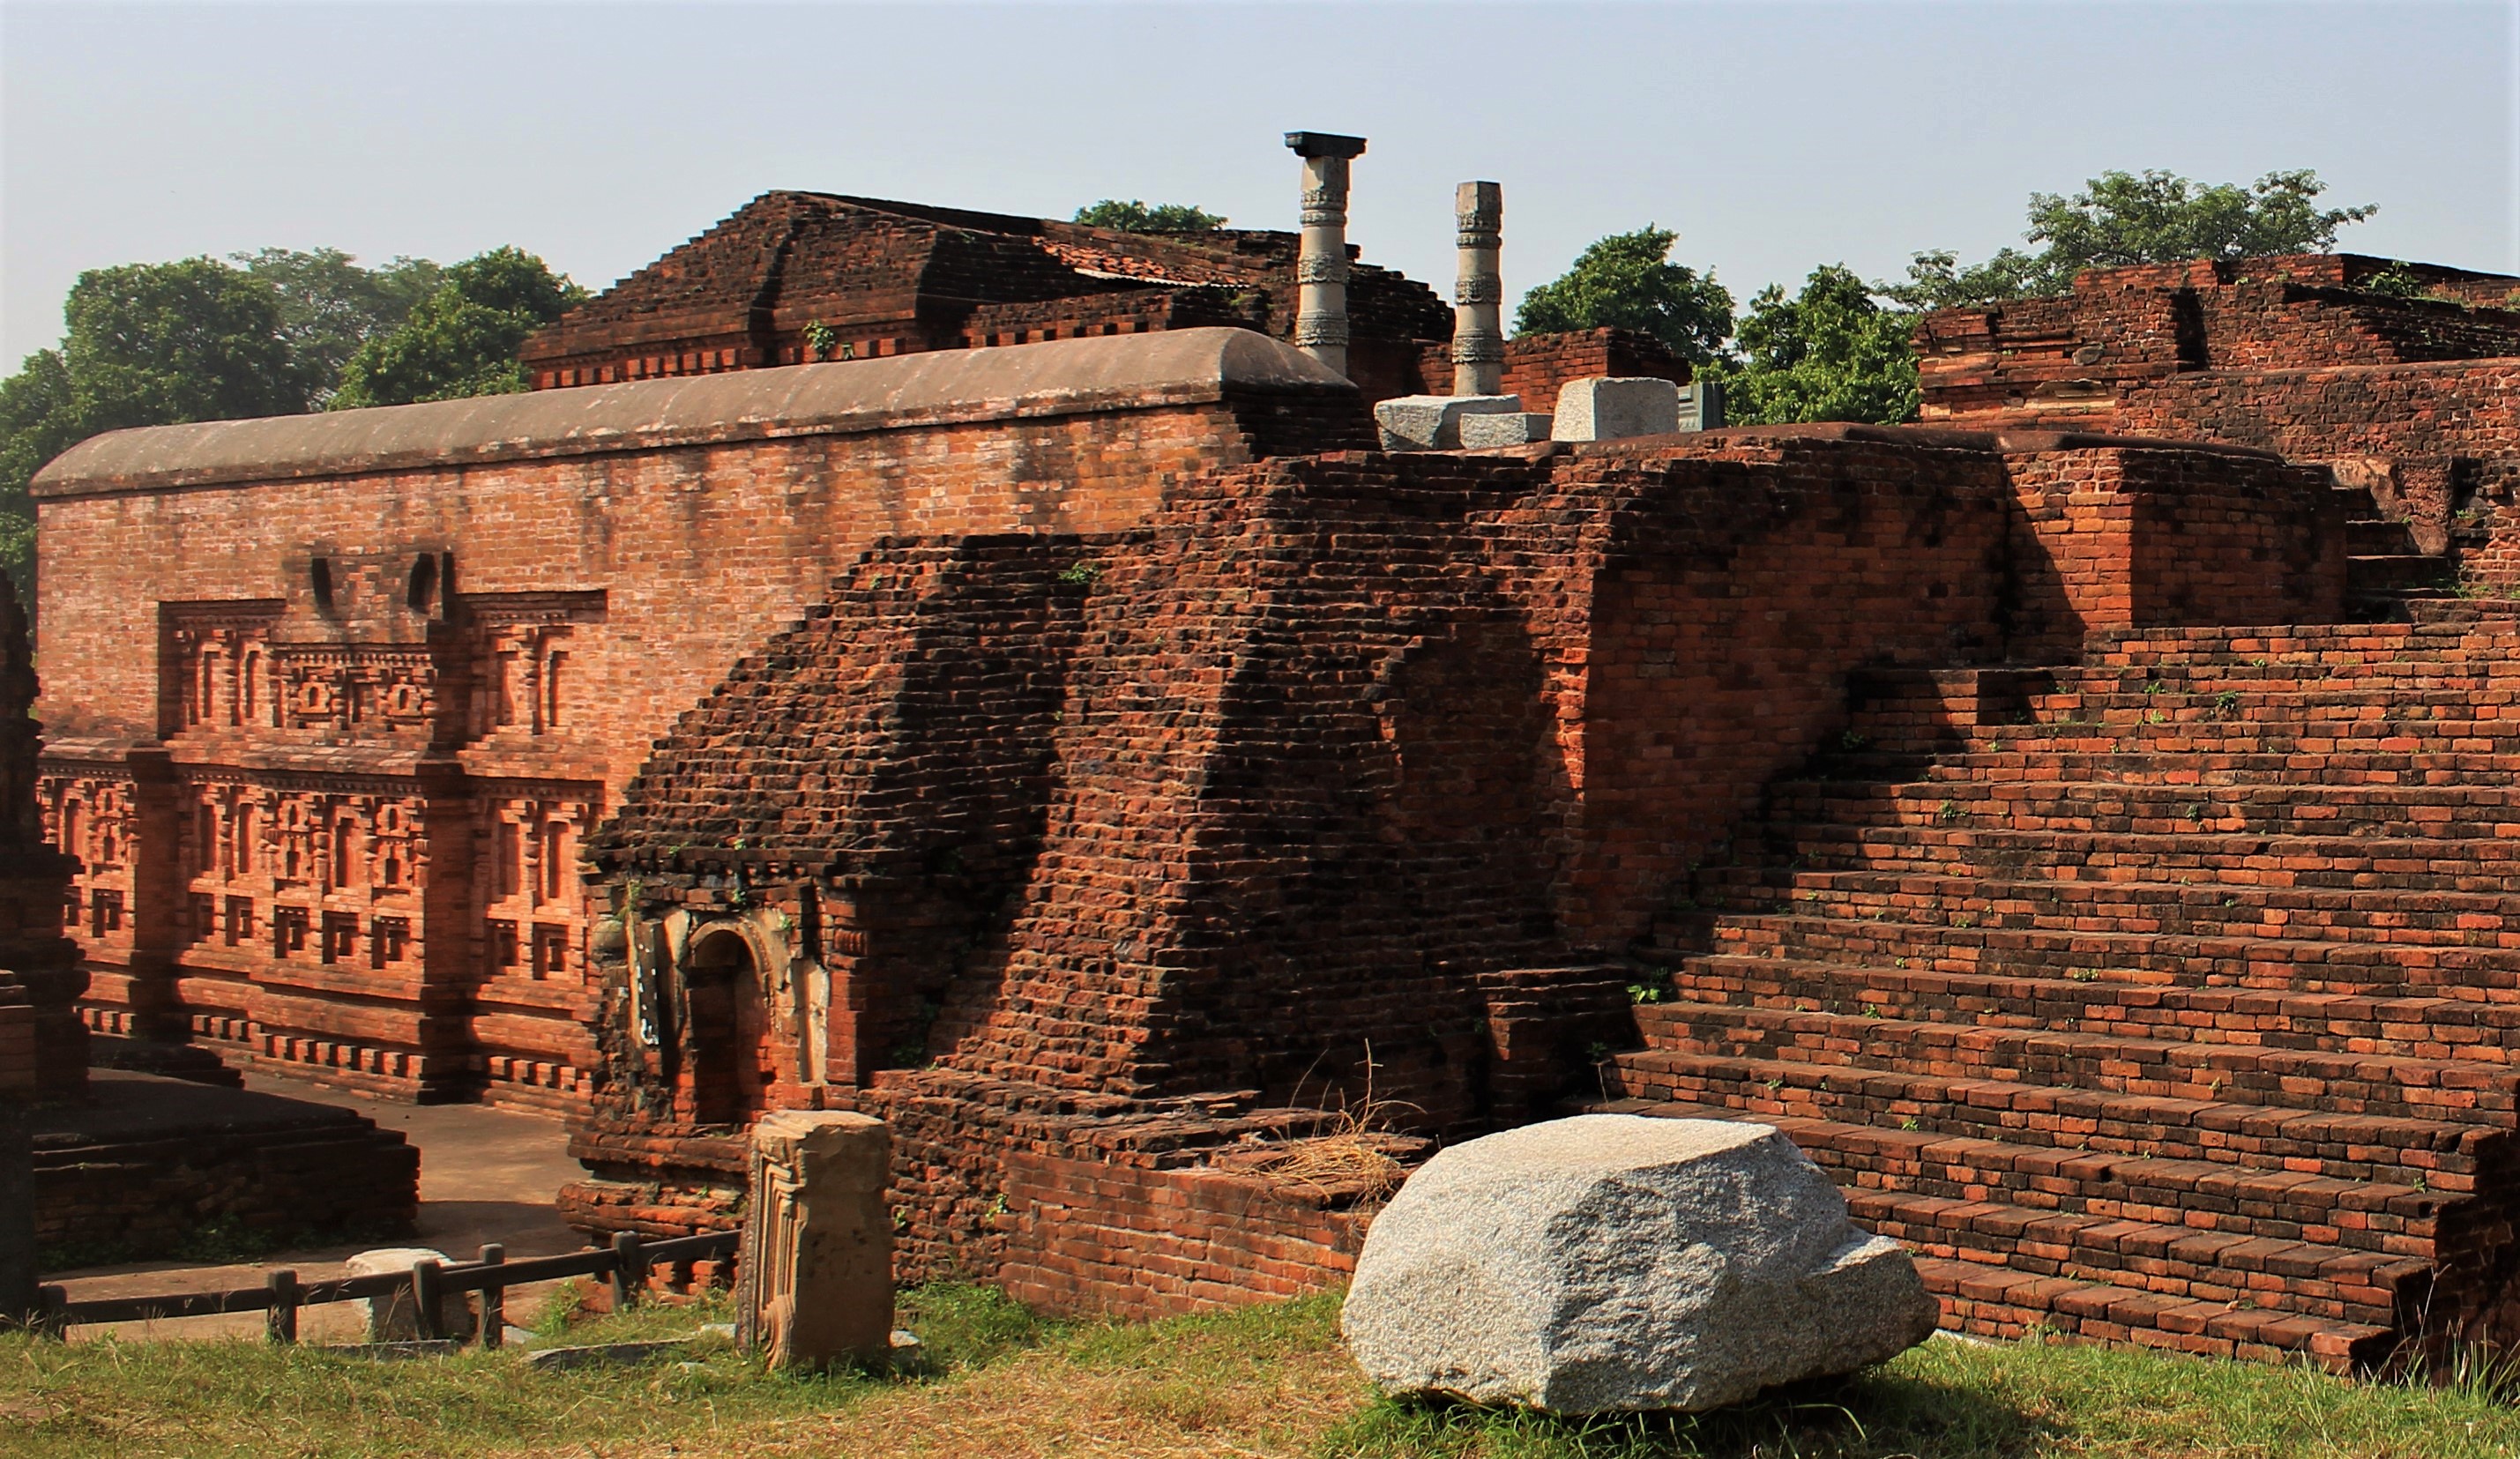 Ruins of Temple at Site No. 12